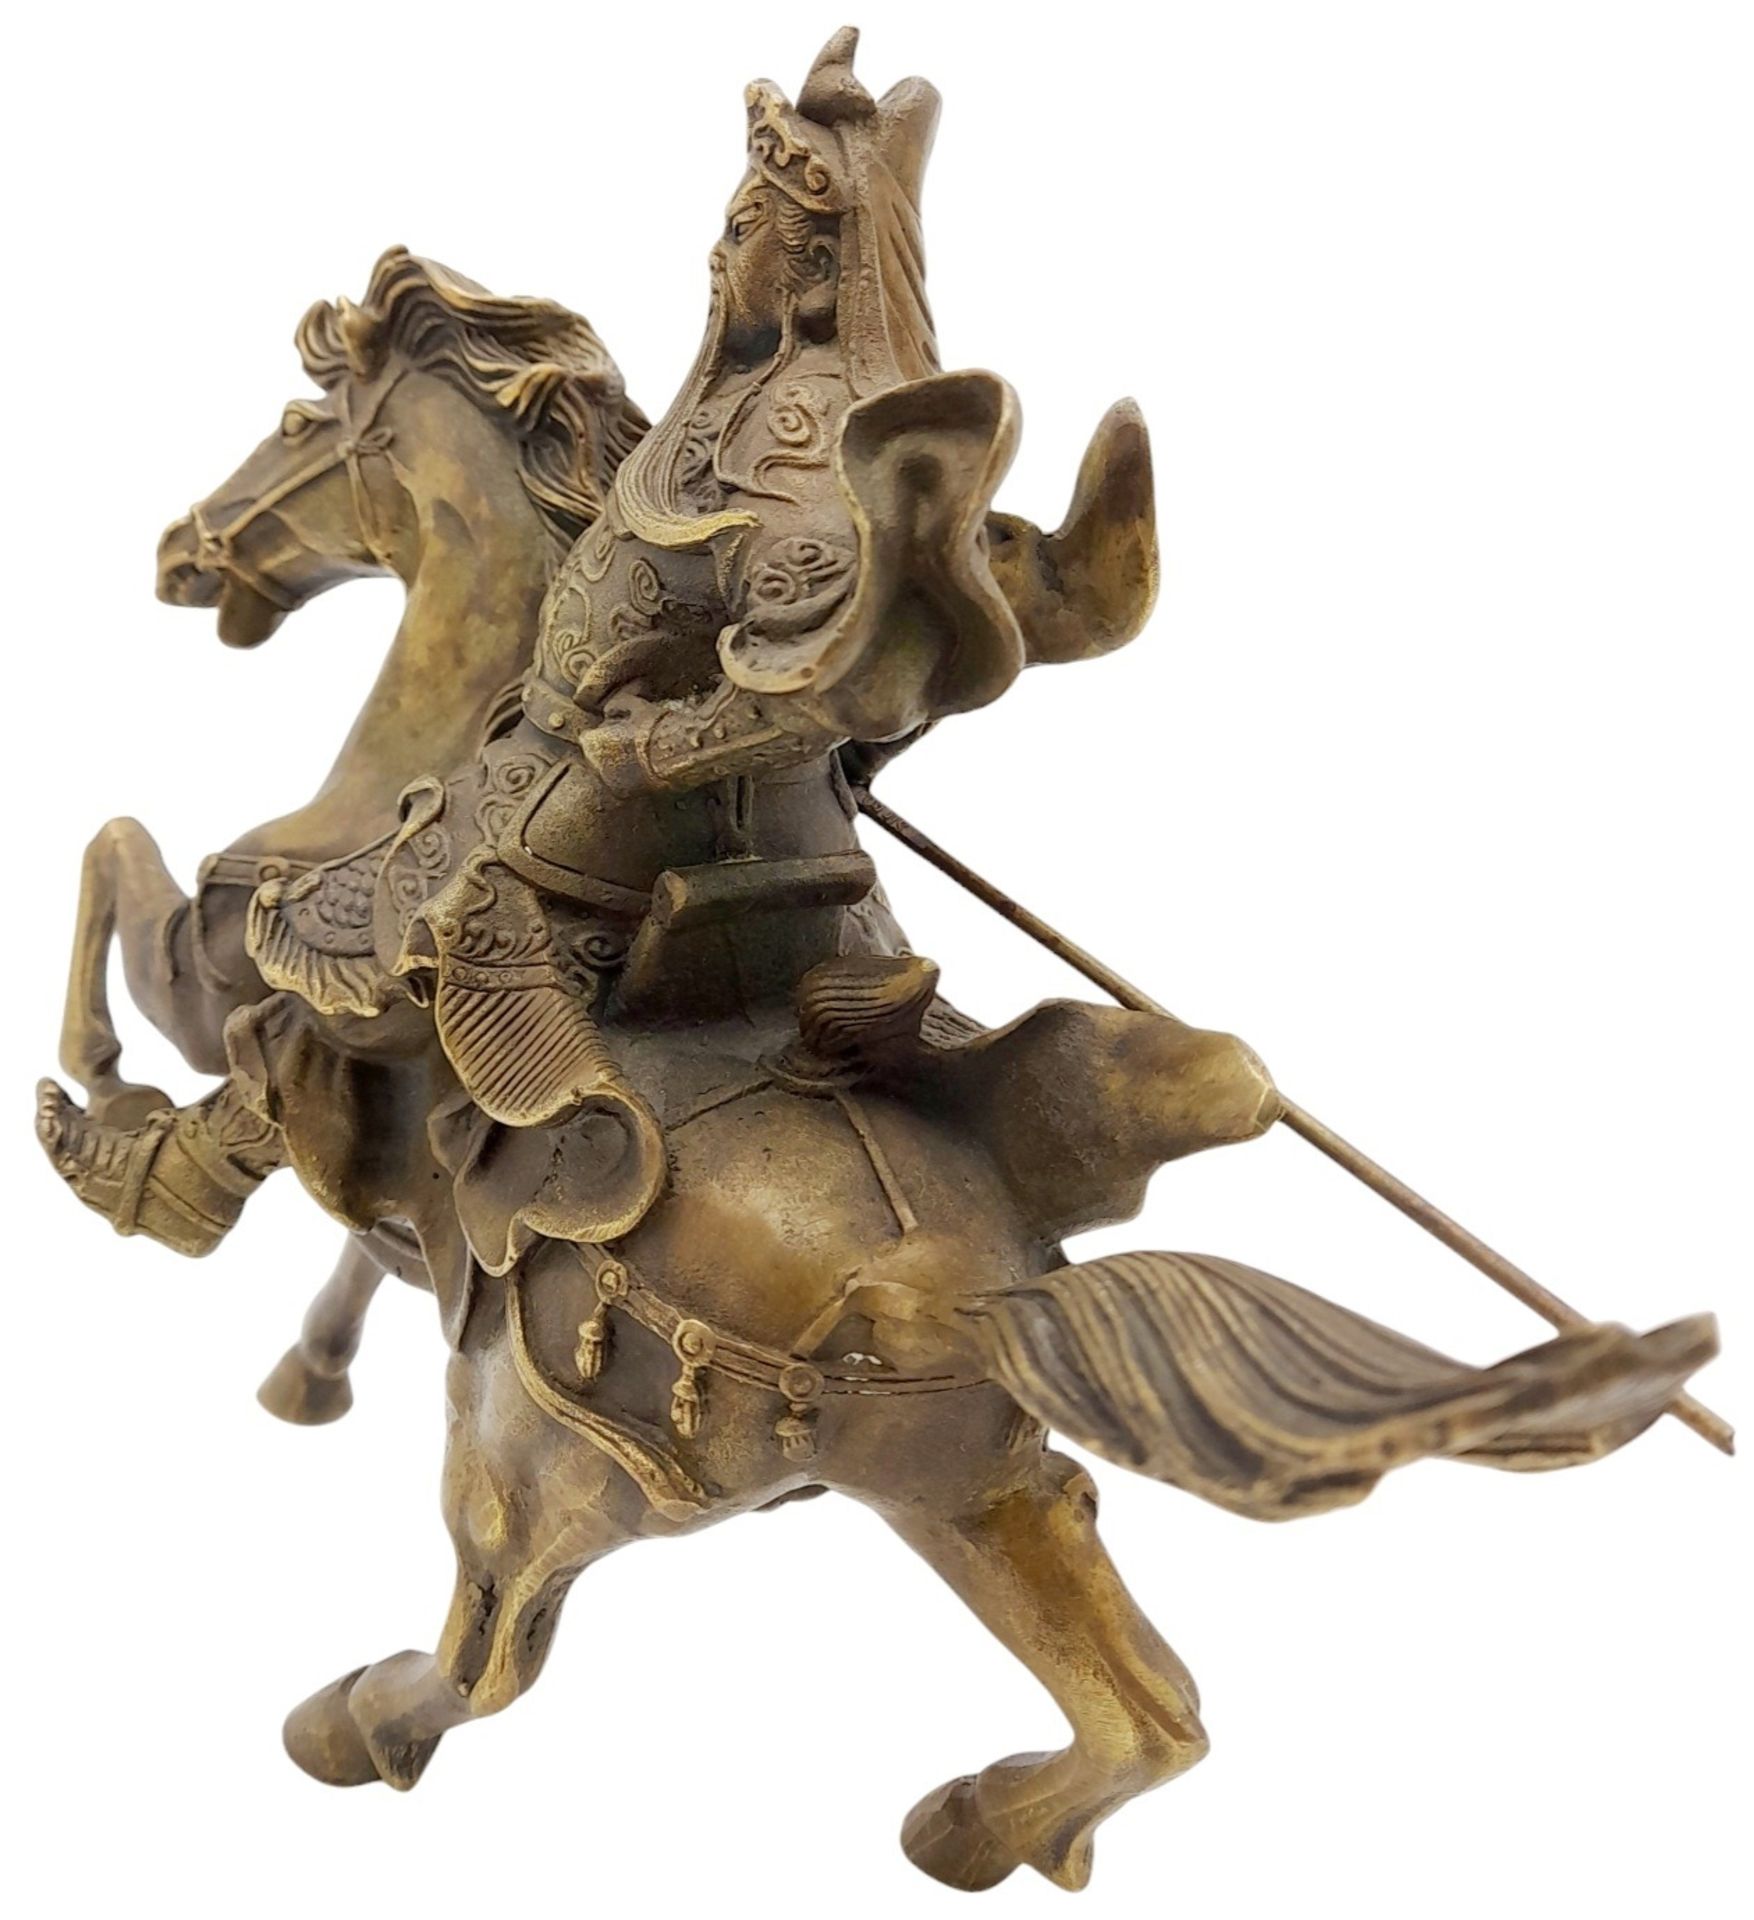 A Vintage Chinese Copper Guan Gong (God of war and wealth) on Horseback Statue. 23cm x 19cm tall. - Bild 2 aus 6